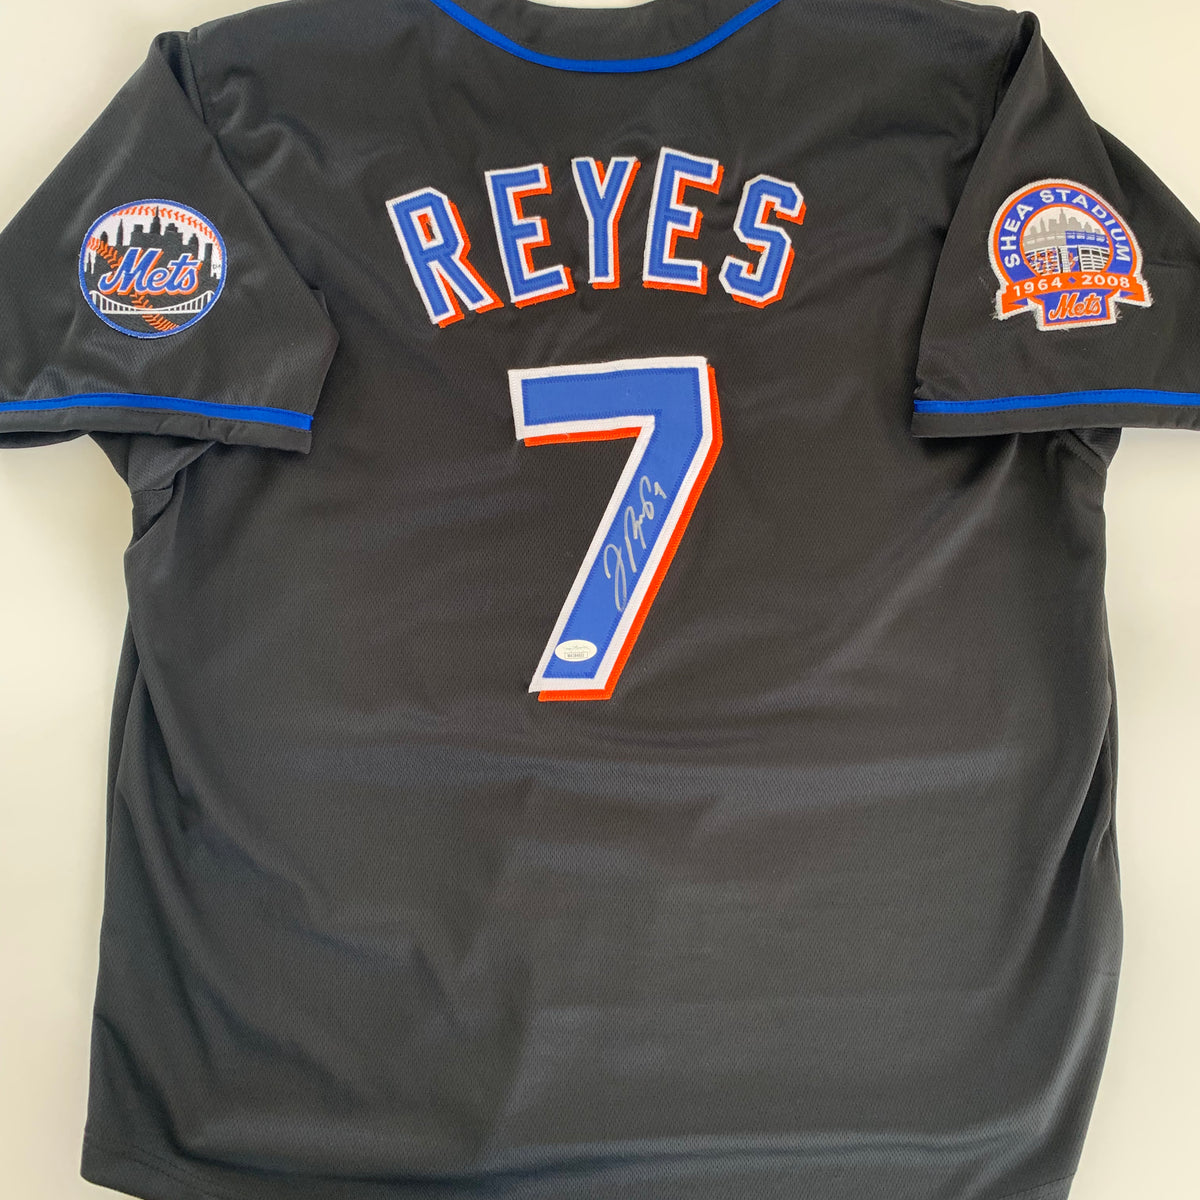 Jose Reyes Autographed 2006 All Star CUSTOM Jersey with 1st ASG Inscription  (JSA)